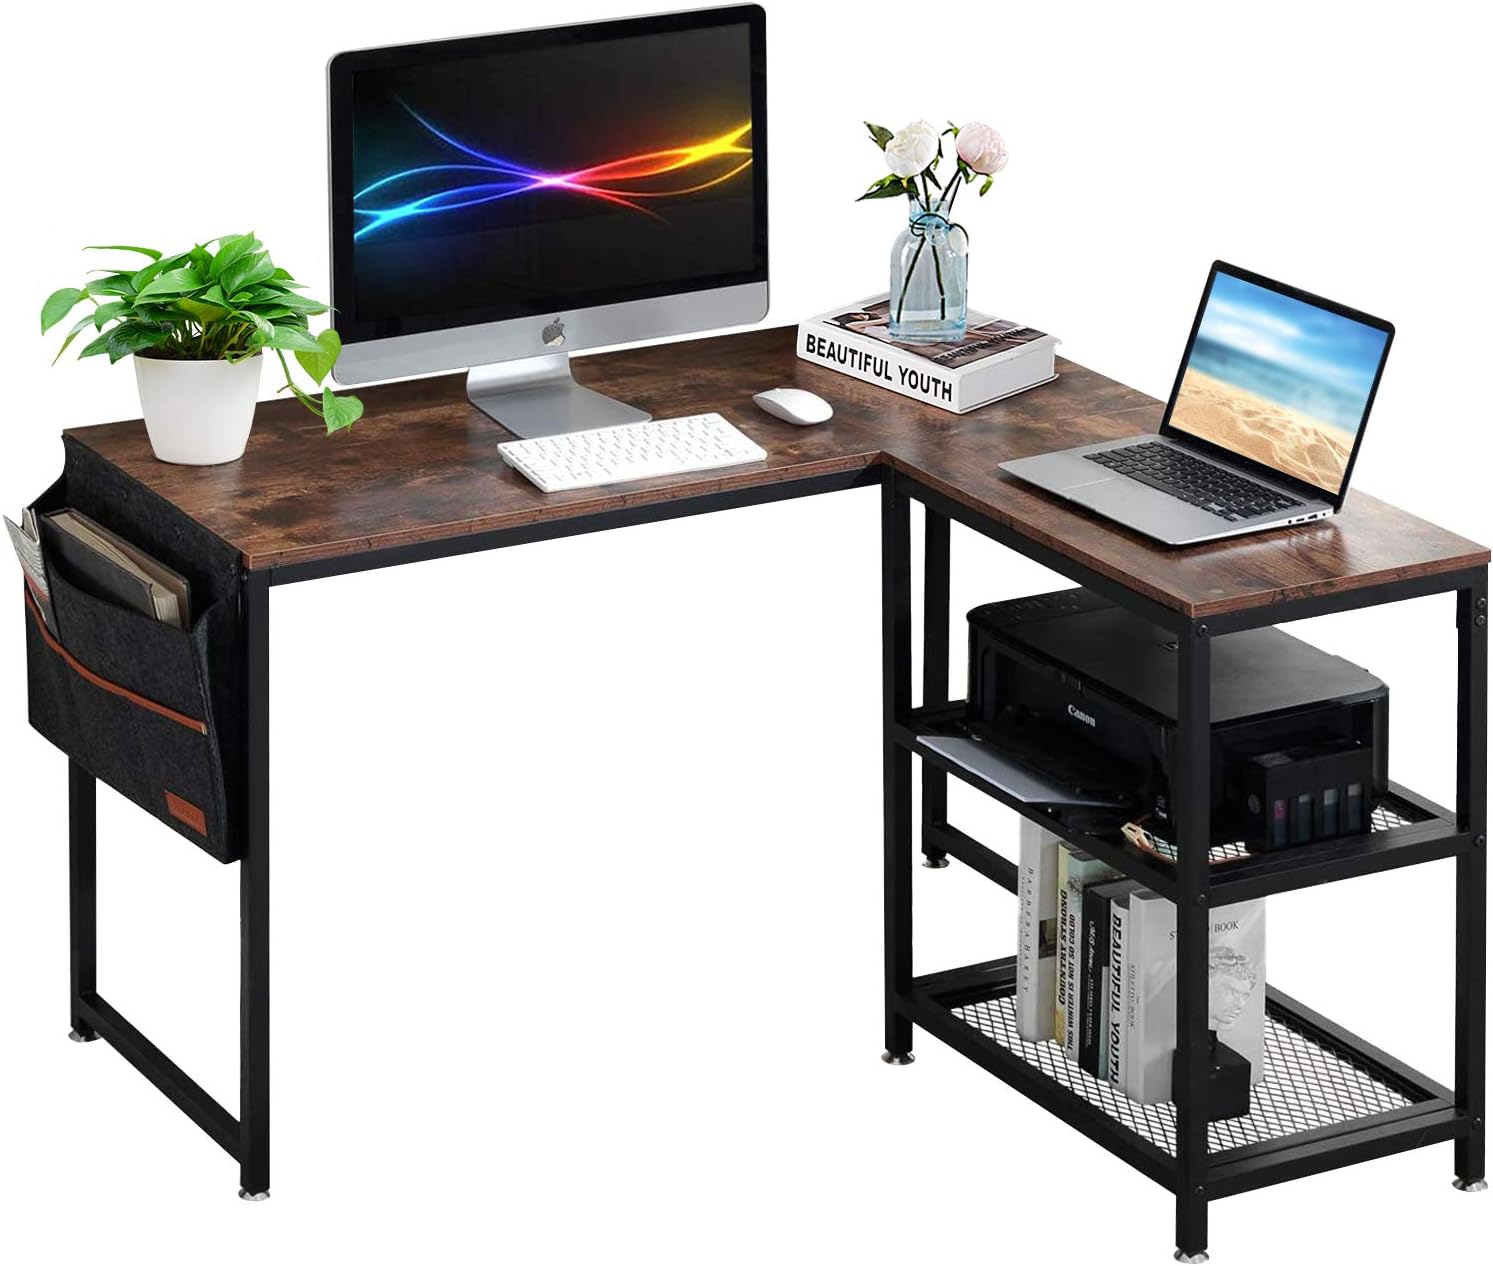 PAZANO Table Study Computer Office Table for Adults 【L90xW60cm】 Computer  Table for Home,Work Office Desk,pc Desktop Table,Wooden Table for Office  Work